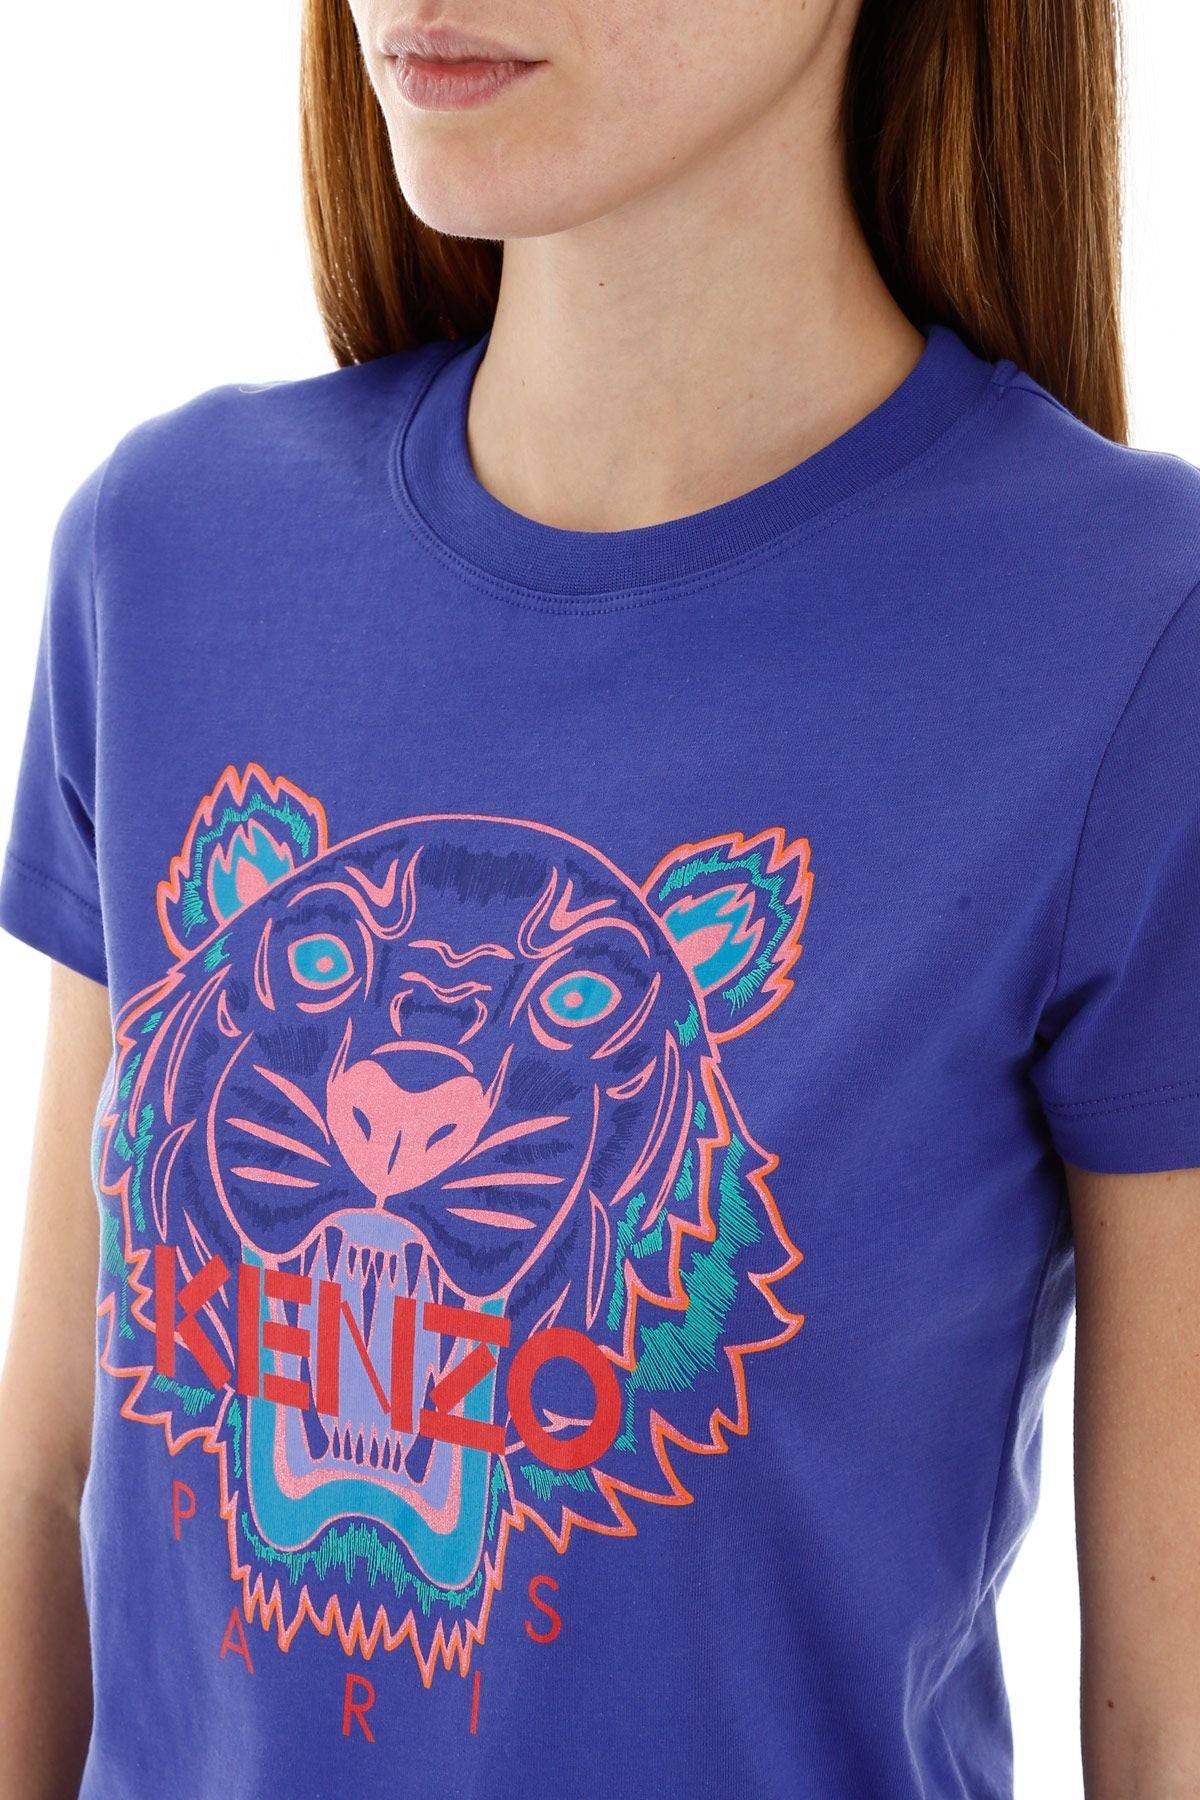 Kenzo Female Neon Tiger T-Shirt - Shop Streetwear, Sneakers, Slippers and Gifts online | Malaysia - The Factory KL